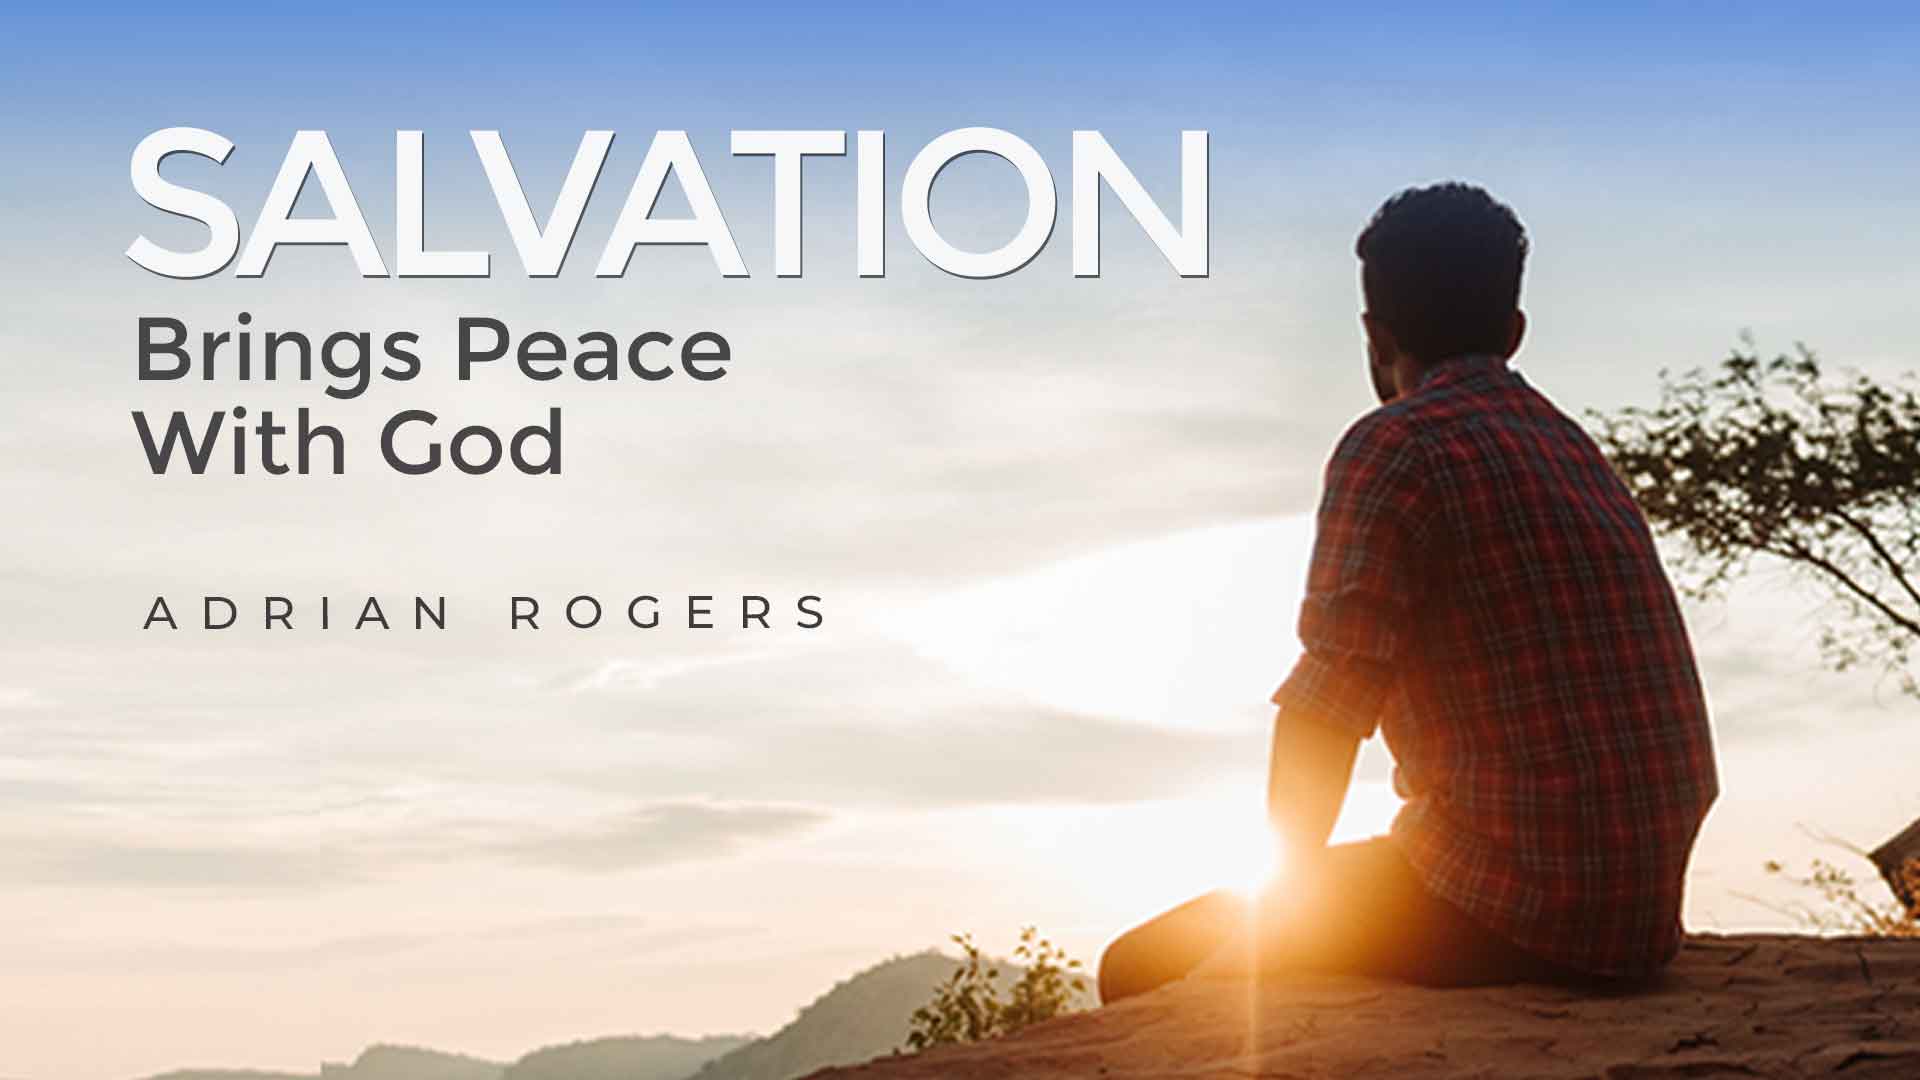 Salvation Brings Peace With God 1920x1080